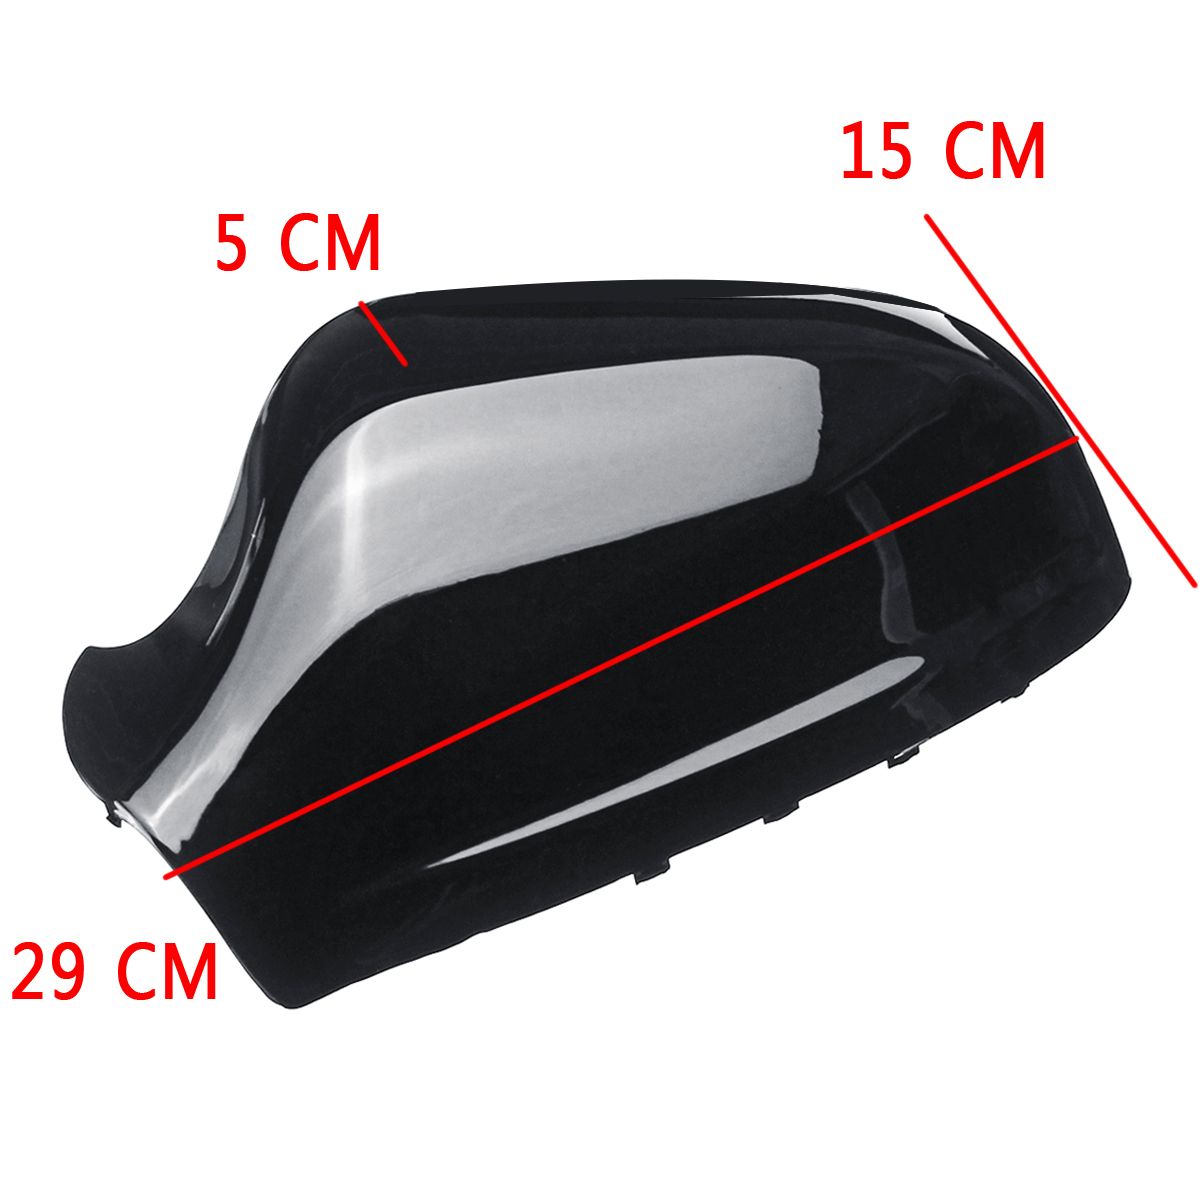 LeftRight-Car-Rearview-Wing-Mirror-Cover-Cap-Black-For-Opel-Vauxhall-Astra-MK5-2010-2013-1559495